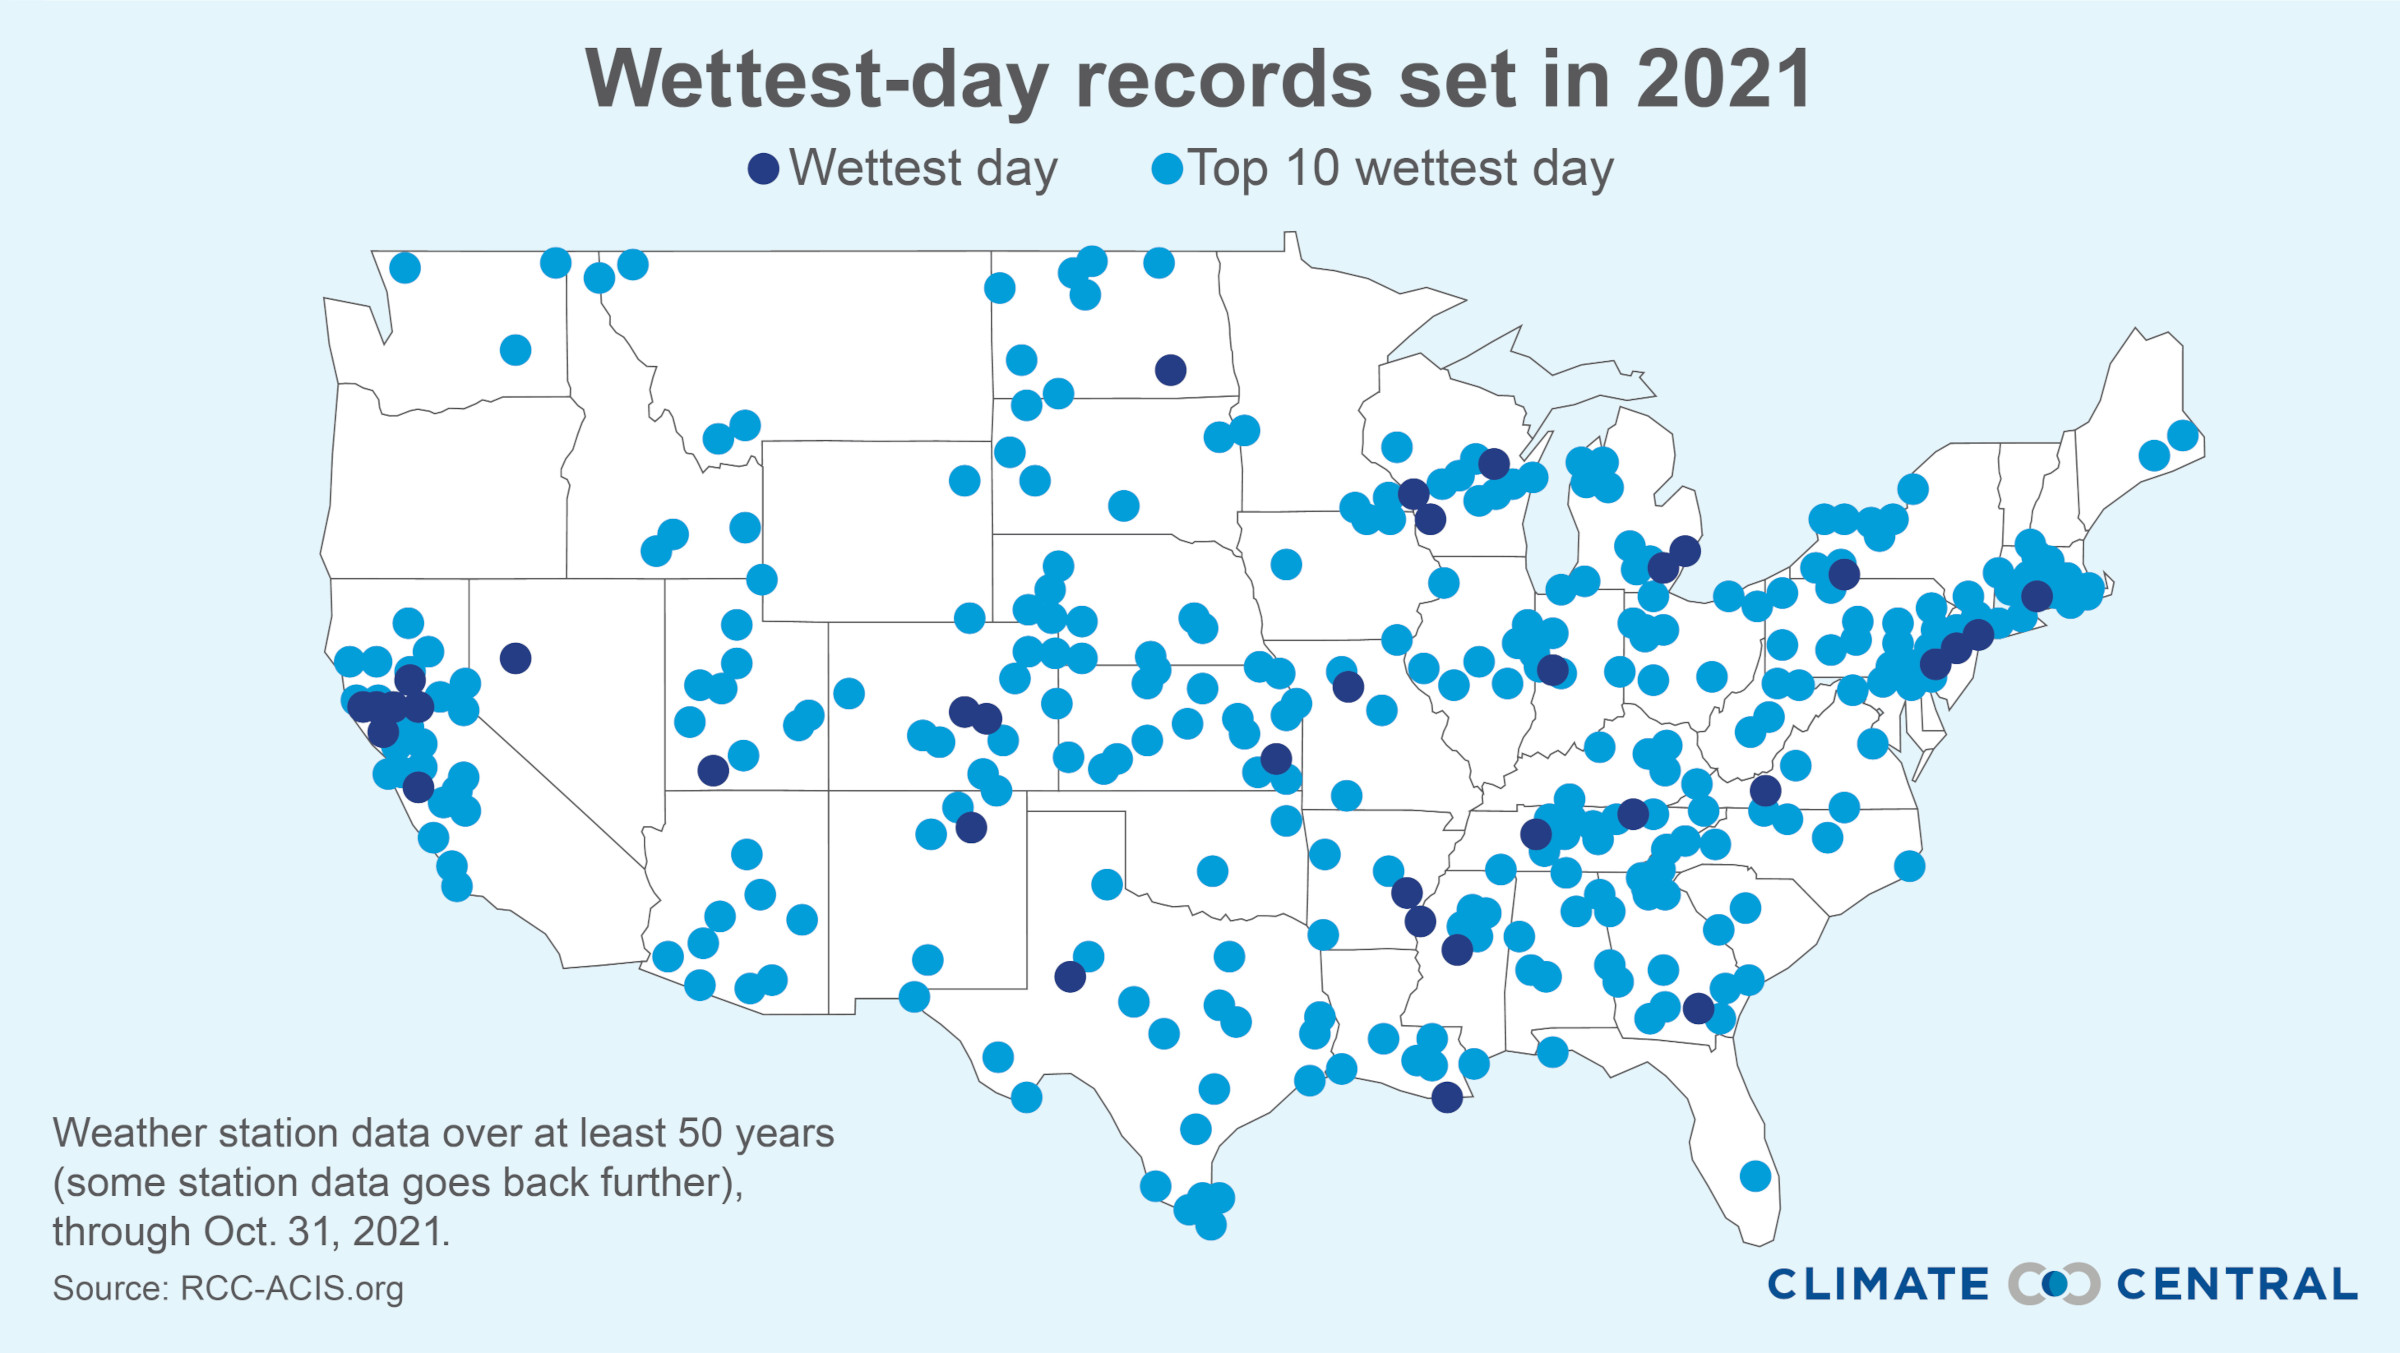 Map of wettest-day records set in 2021, with many data points for the wettest or top 10 wettest days both inland and along coasts in the U.S., using weather station data dating over at least 50 years (via Climate Central)